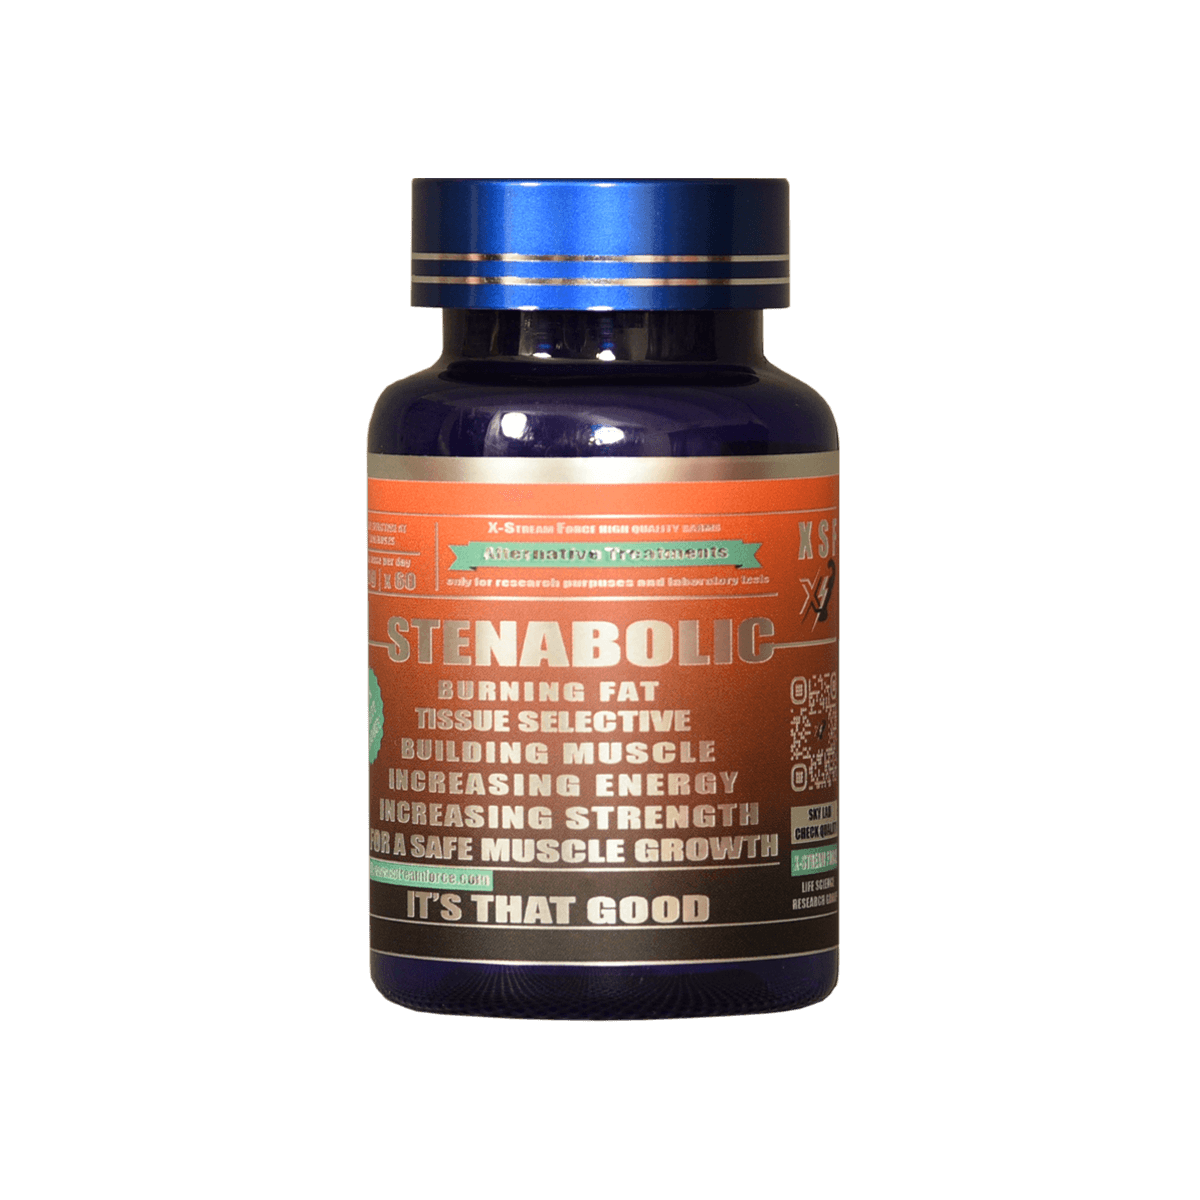 stenabolic-sr9009-capsules-60-10mg-muscle shop-xstreamforce-for recomp-fat cleaner-muscle builder-stamina-energy✦sr9009 sarms✦ fitness supplements | XSF Store